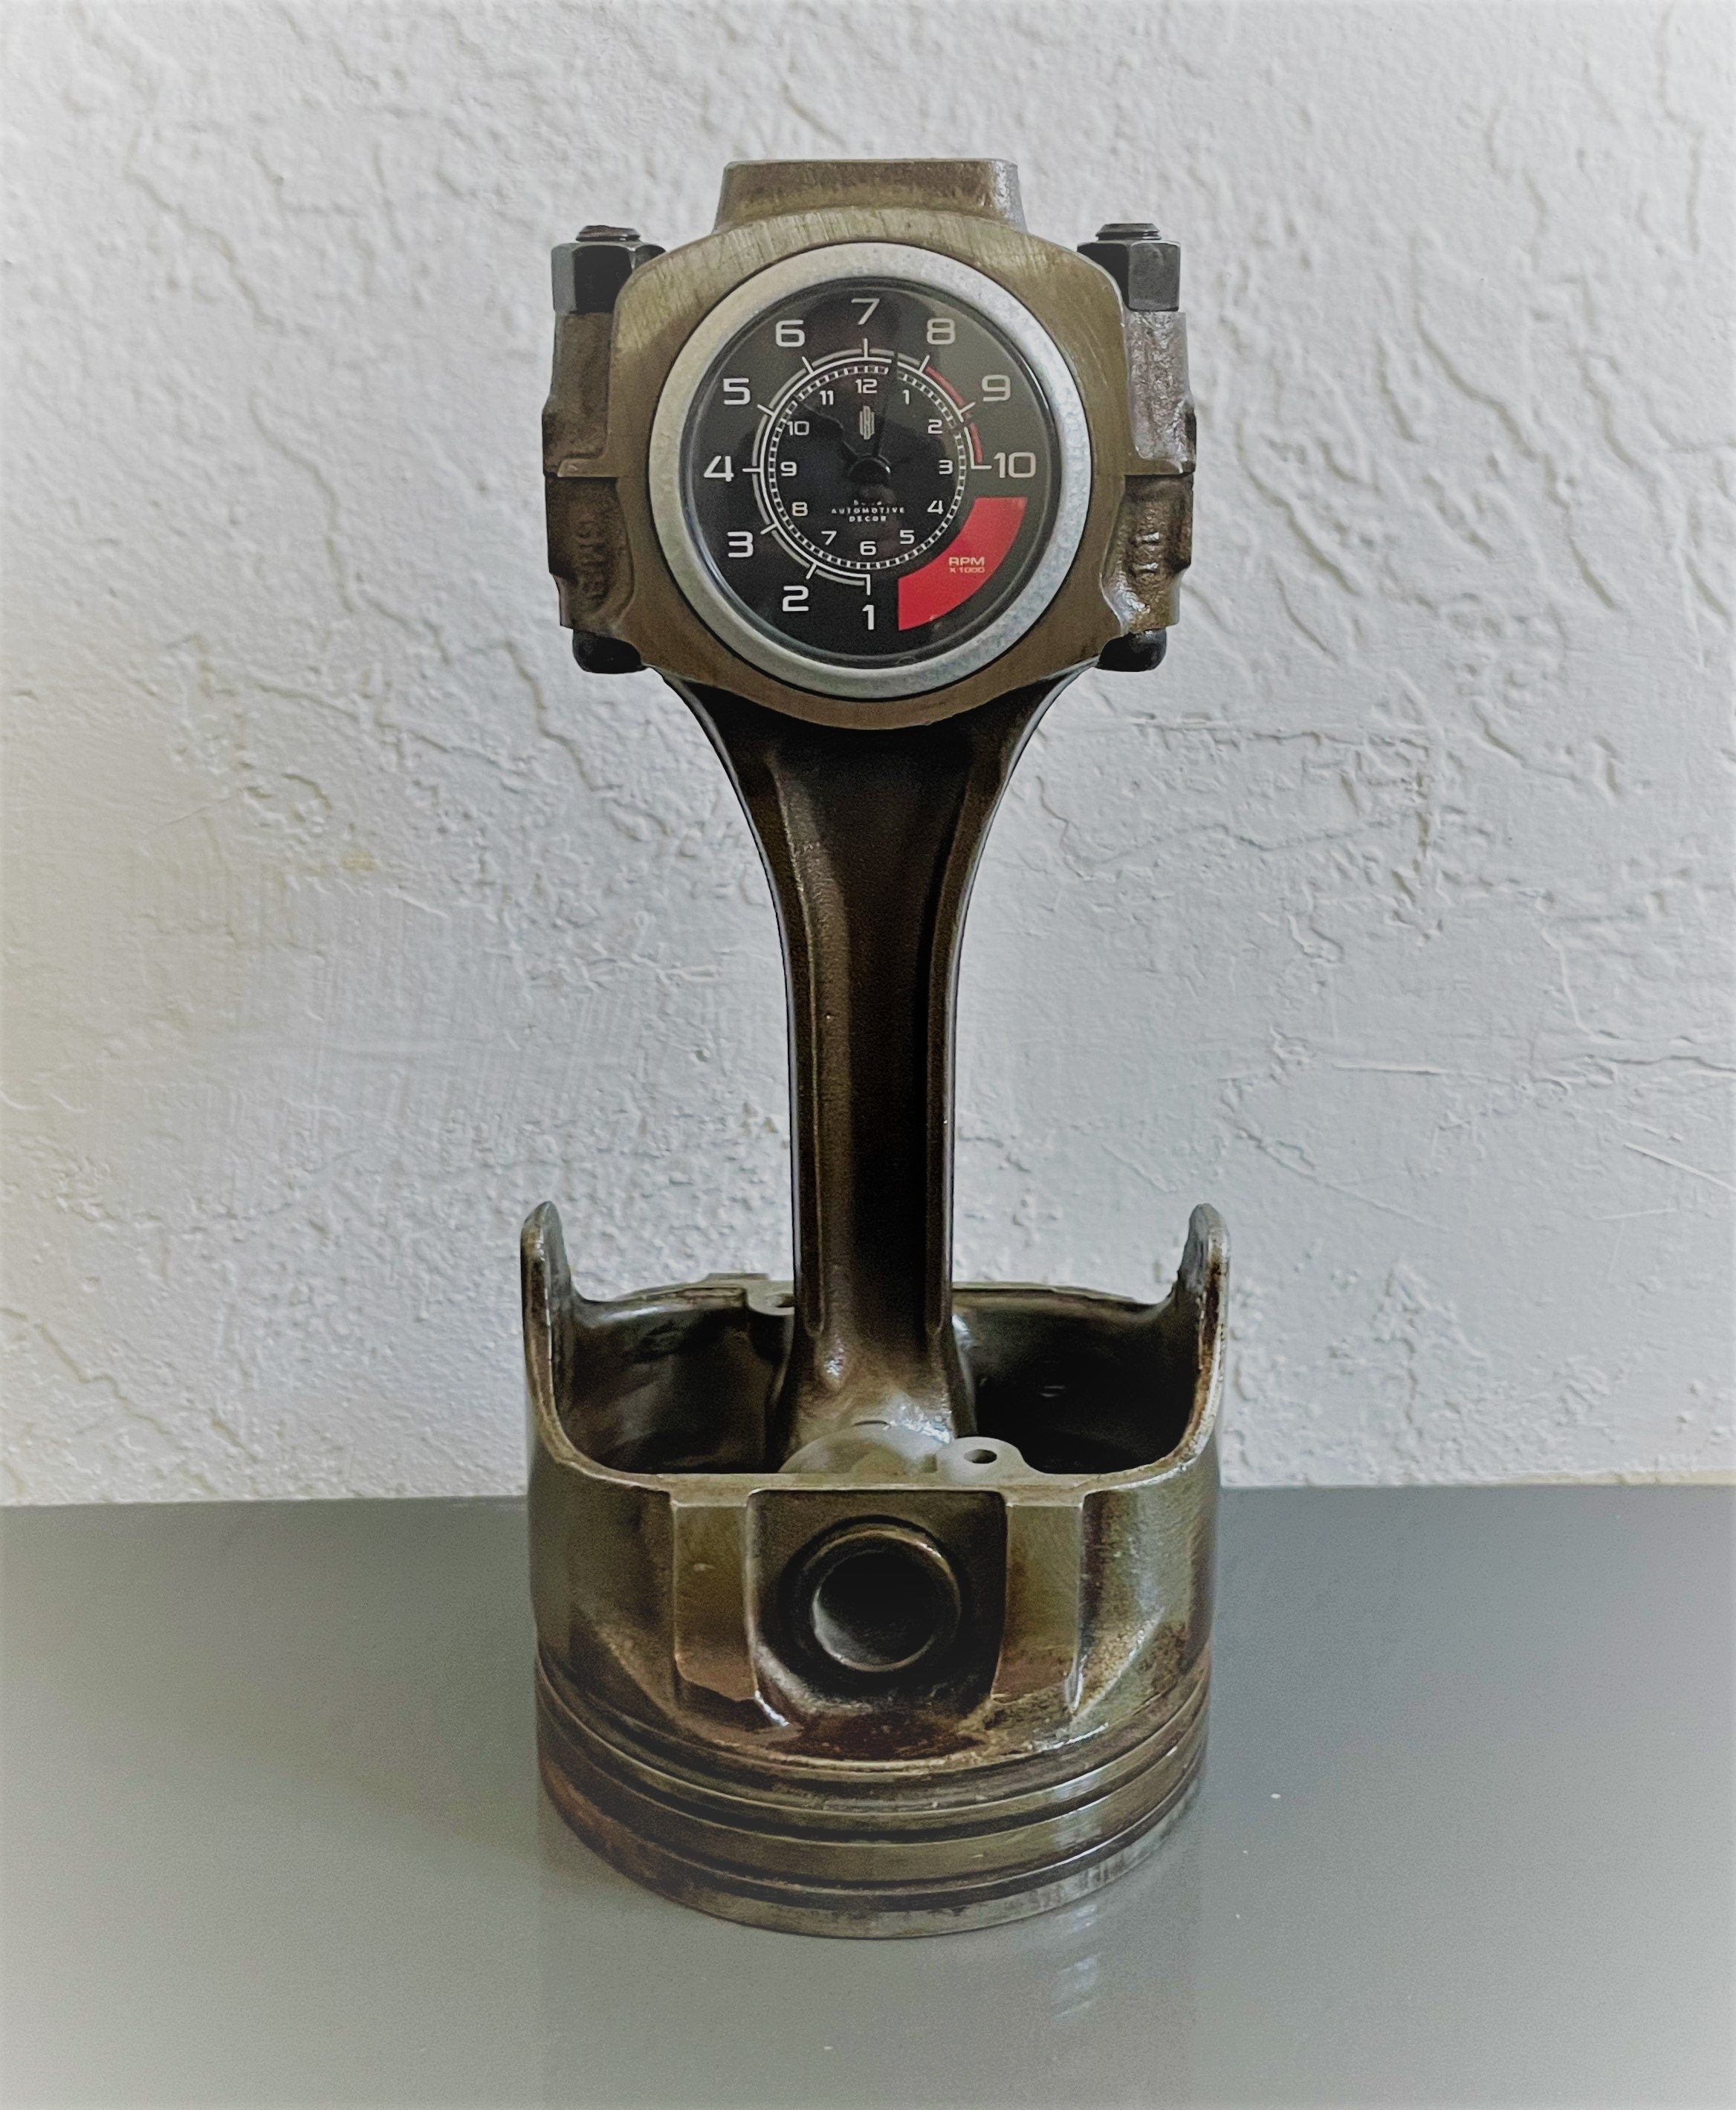 A car piston clock in a patina finish with a silver clock ring and a custom black and red RPM clock face.